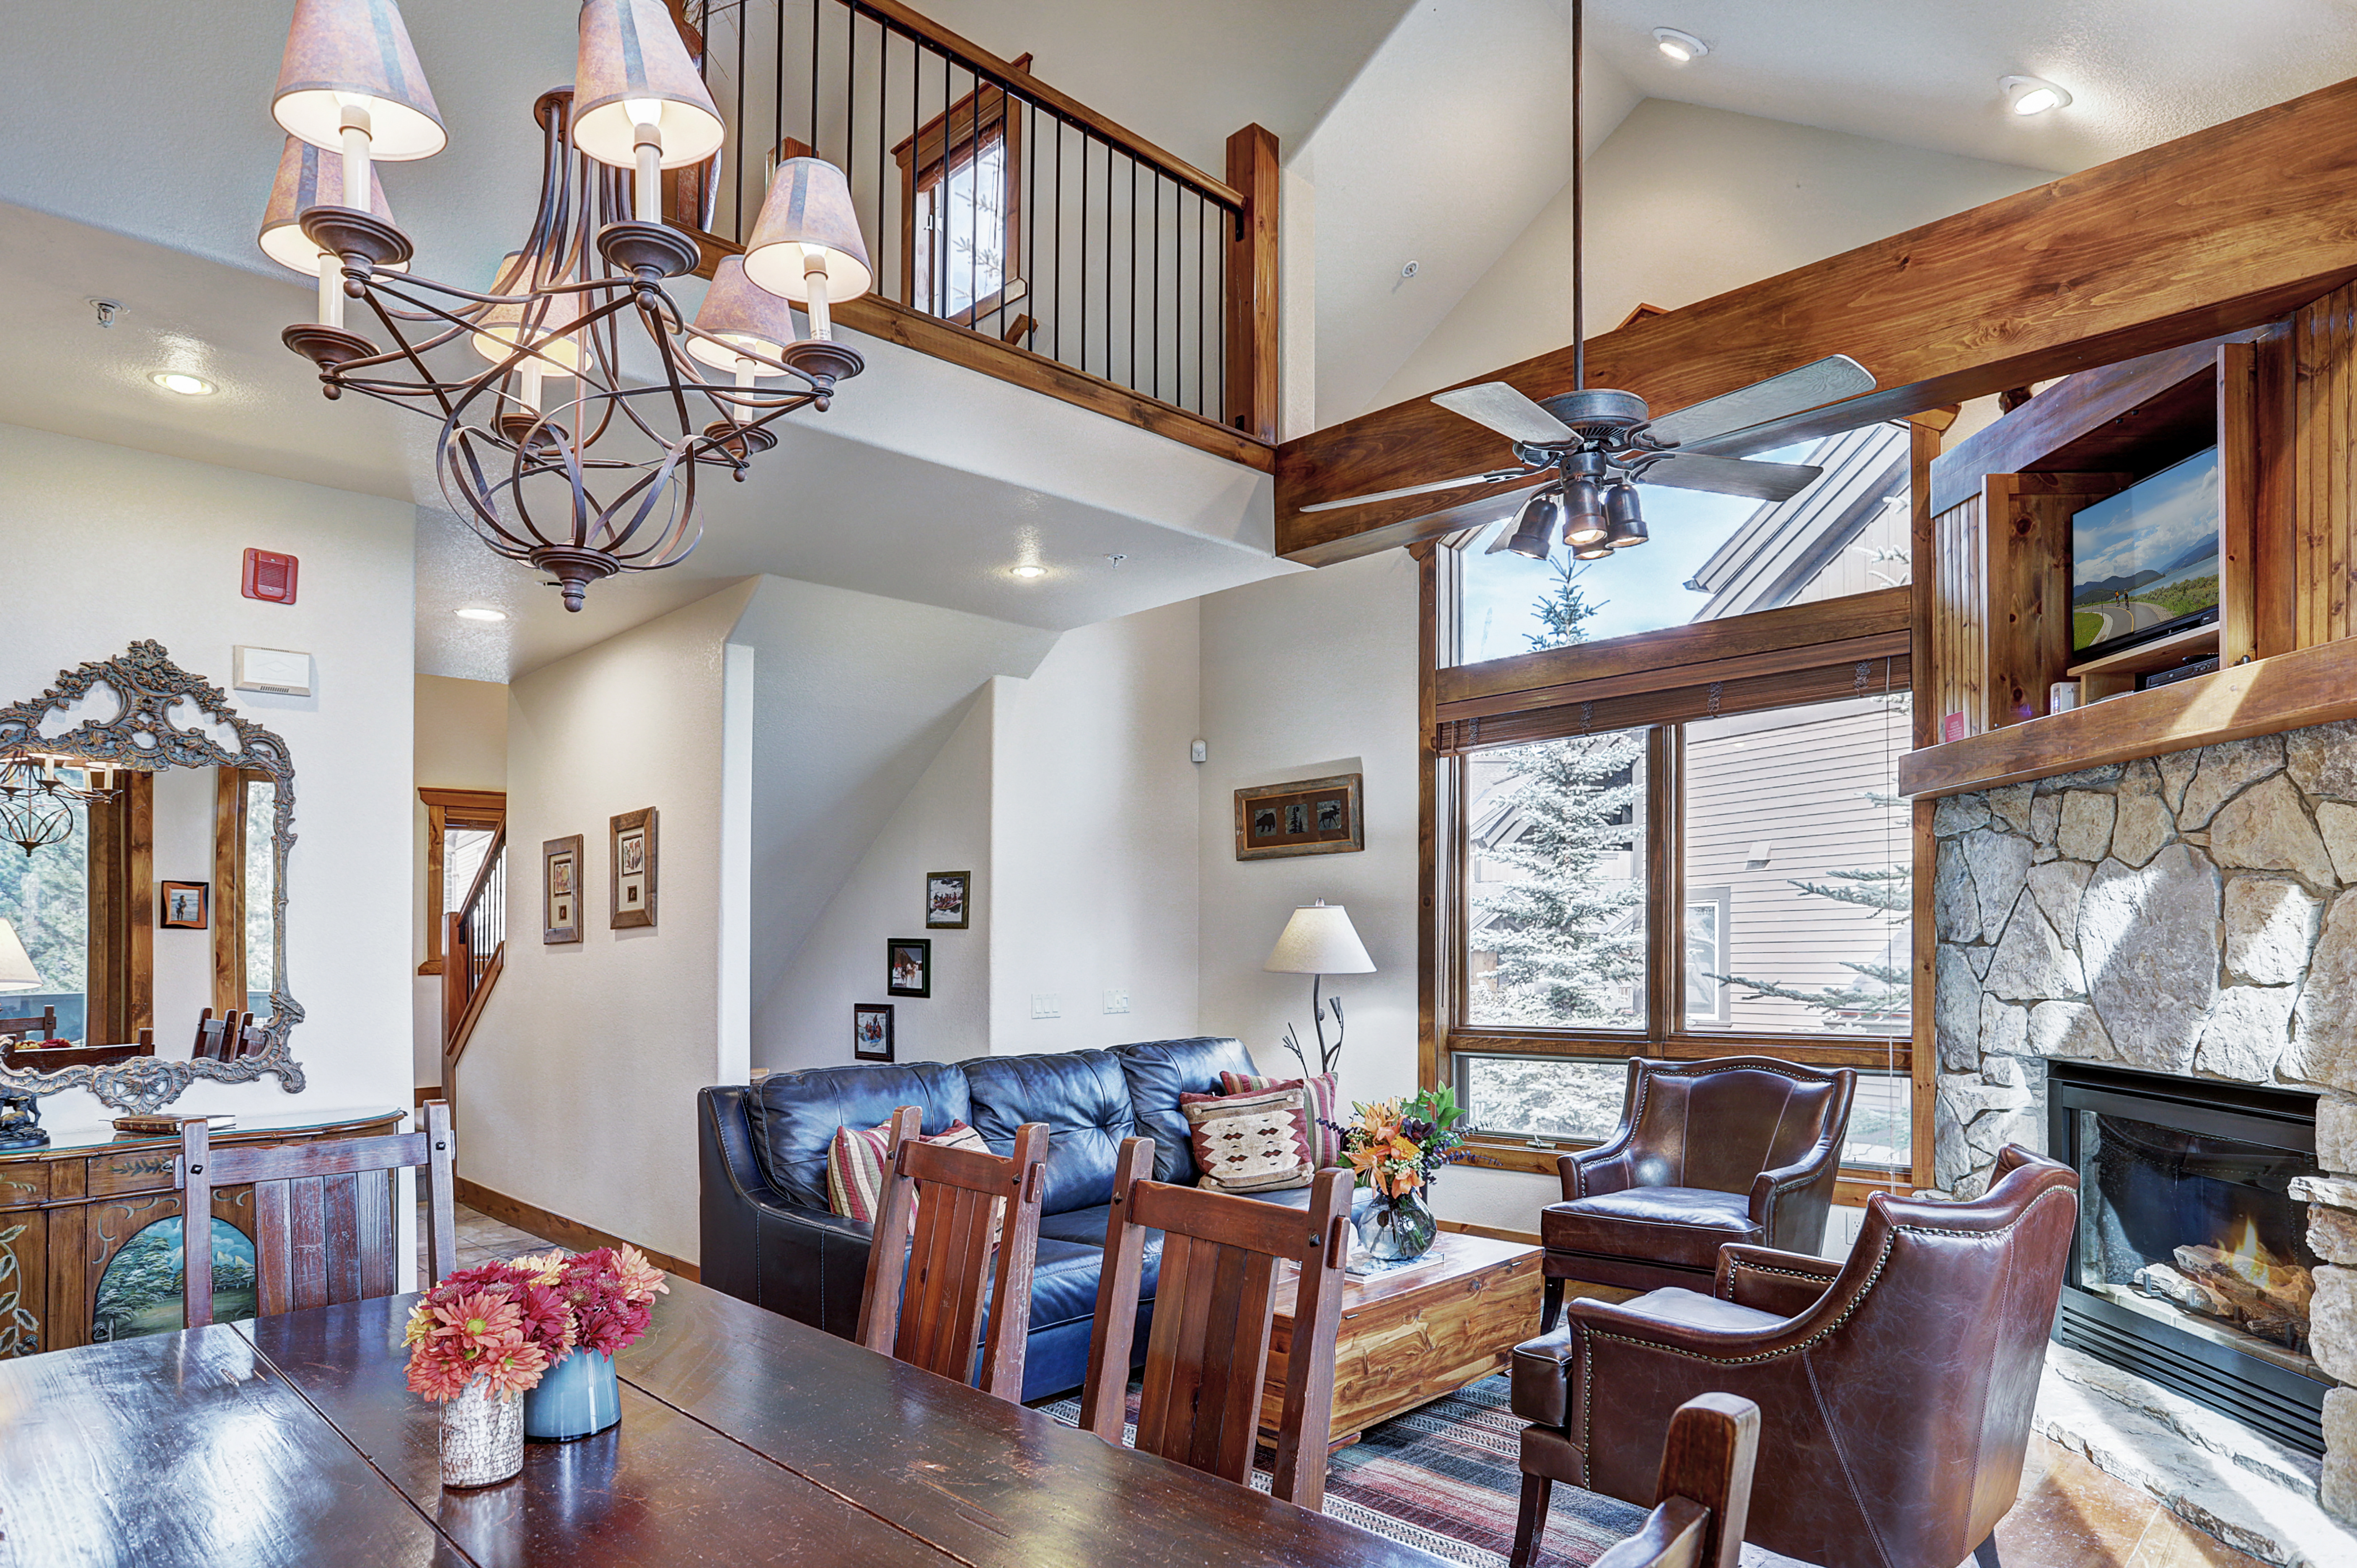 Additional view of living and dining areas - Amber Sky Breckenridge Vacation Rental